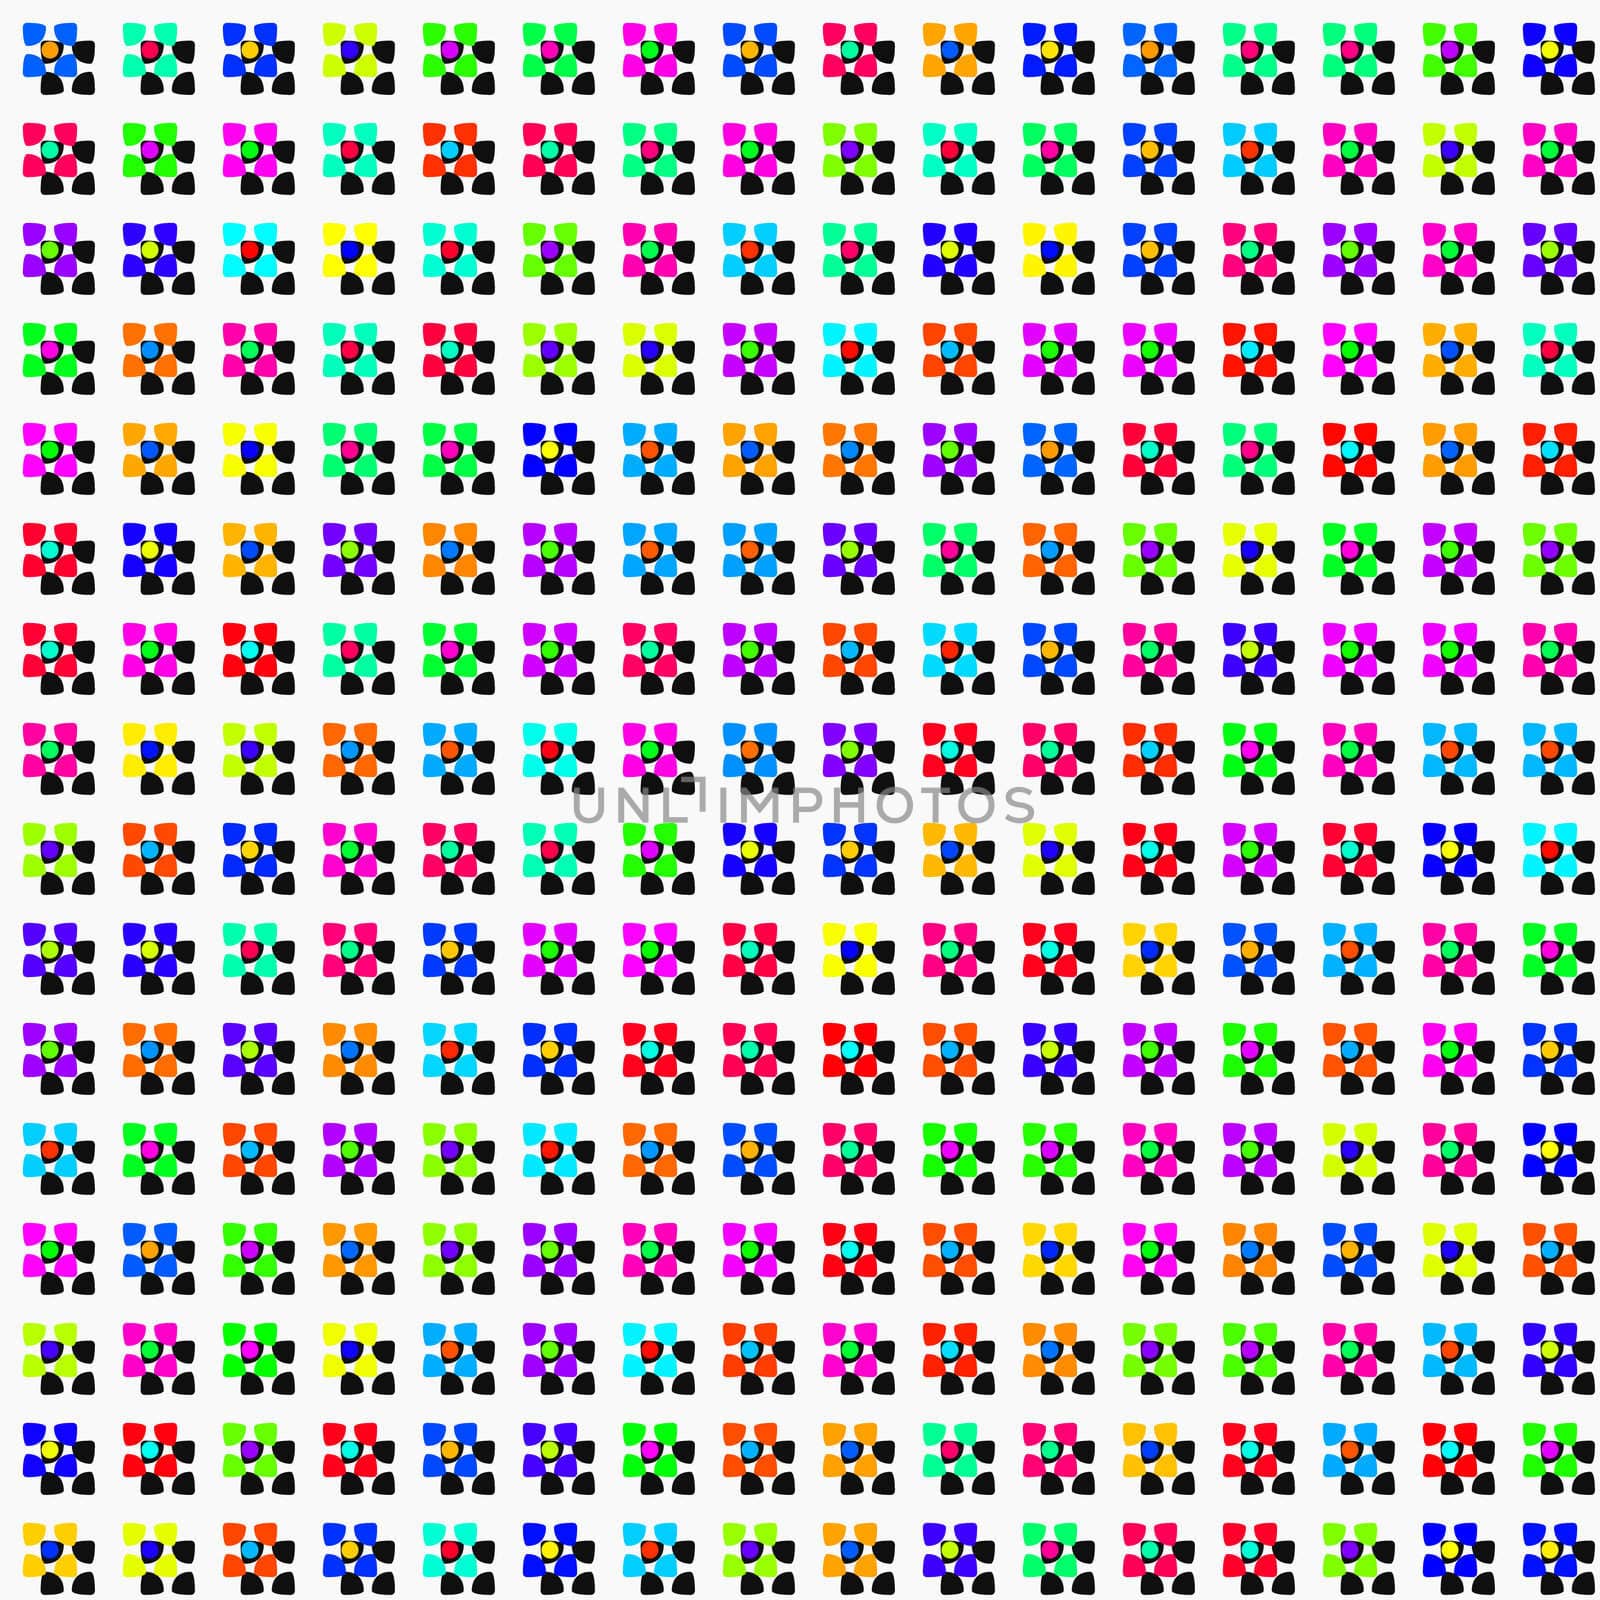 flowers and shadows pattern by weknow